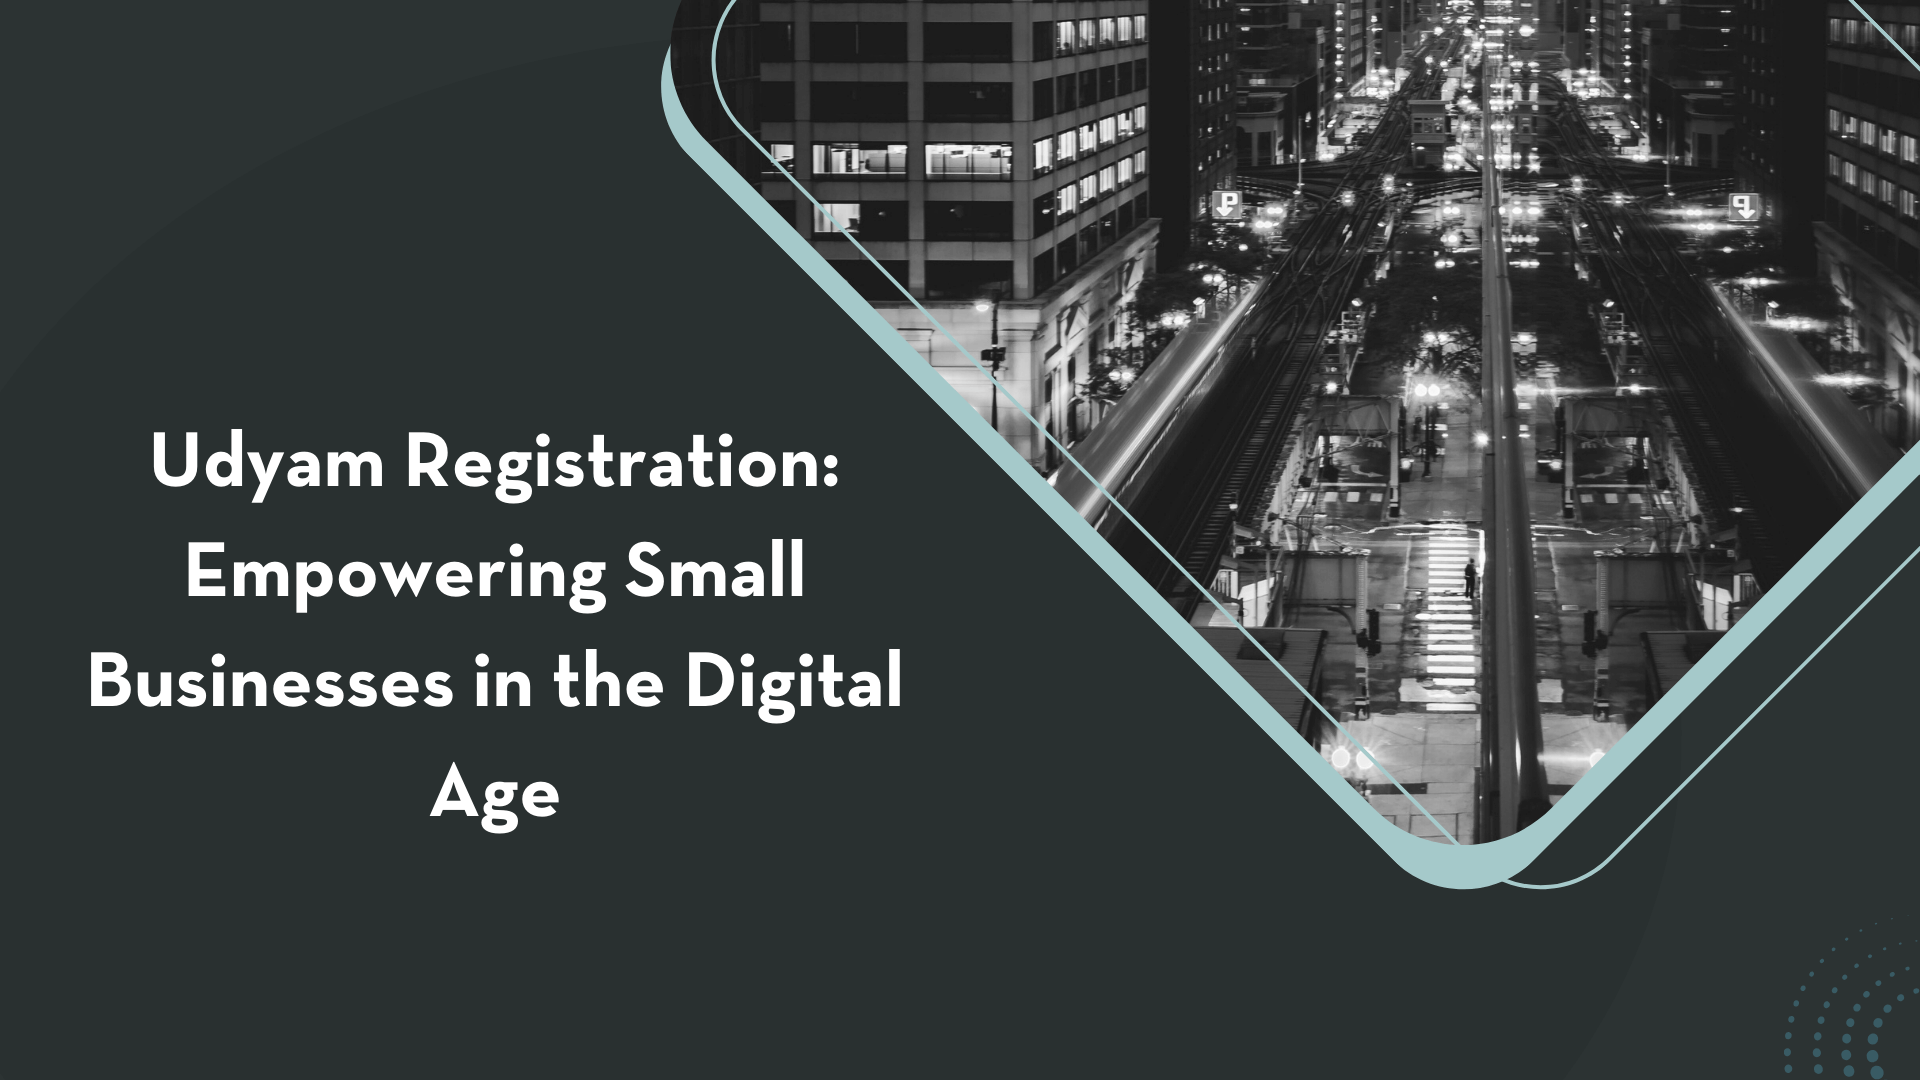 Udyam Registration: Empowering Small Businesses in the Digital Age